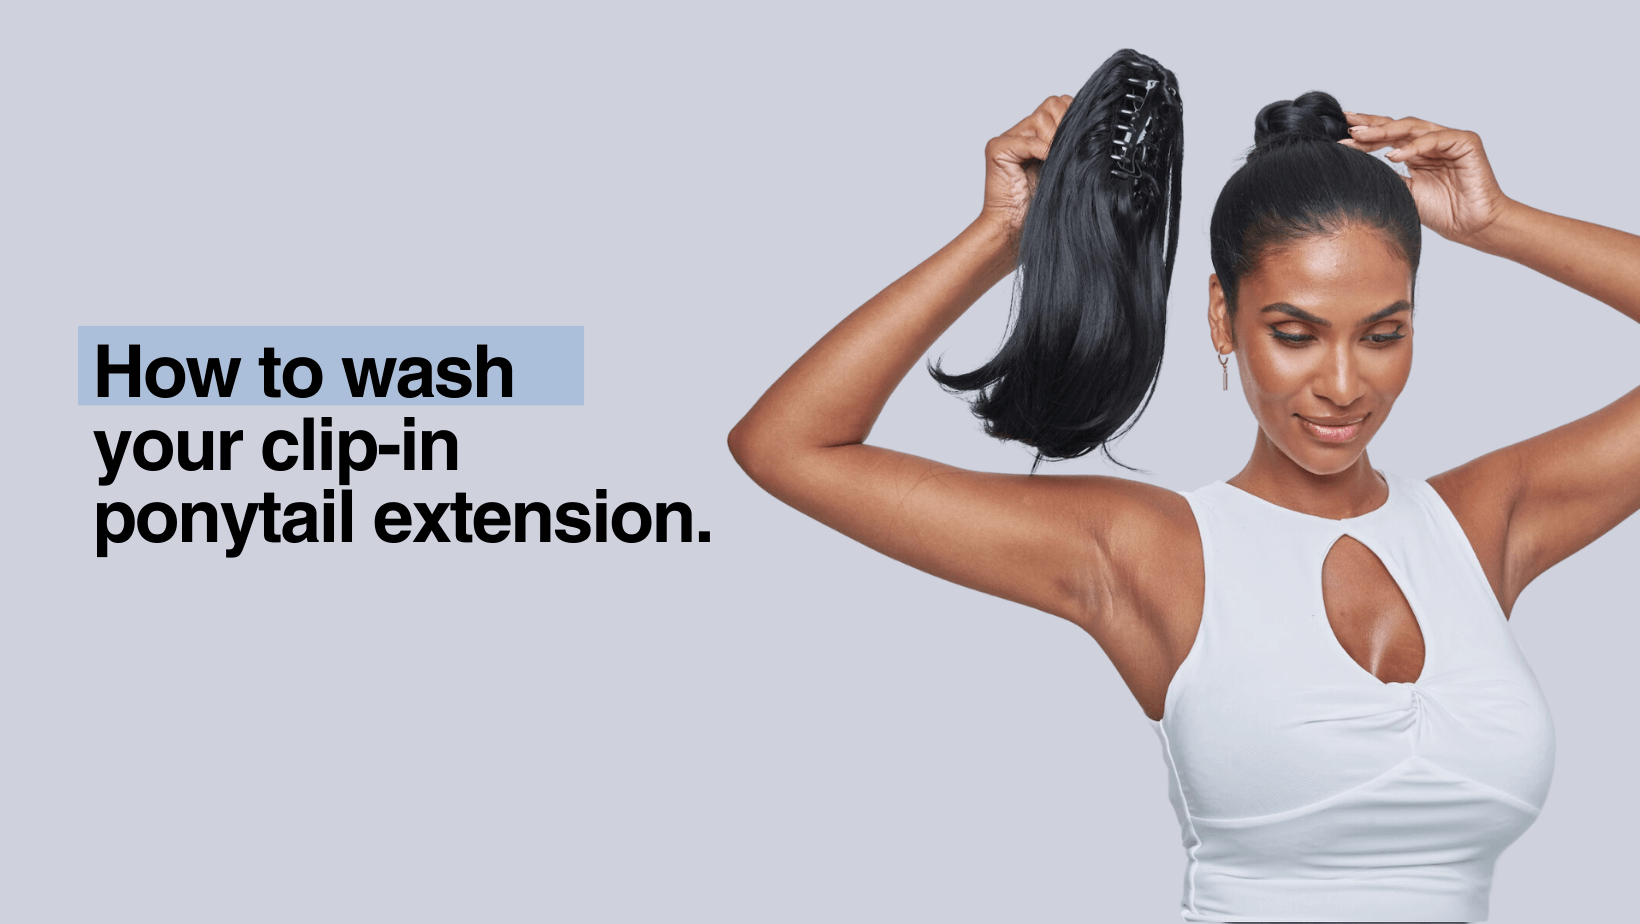 How to Wash Your Clip-in Ponytail Extensions